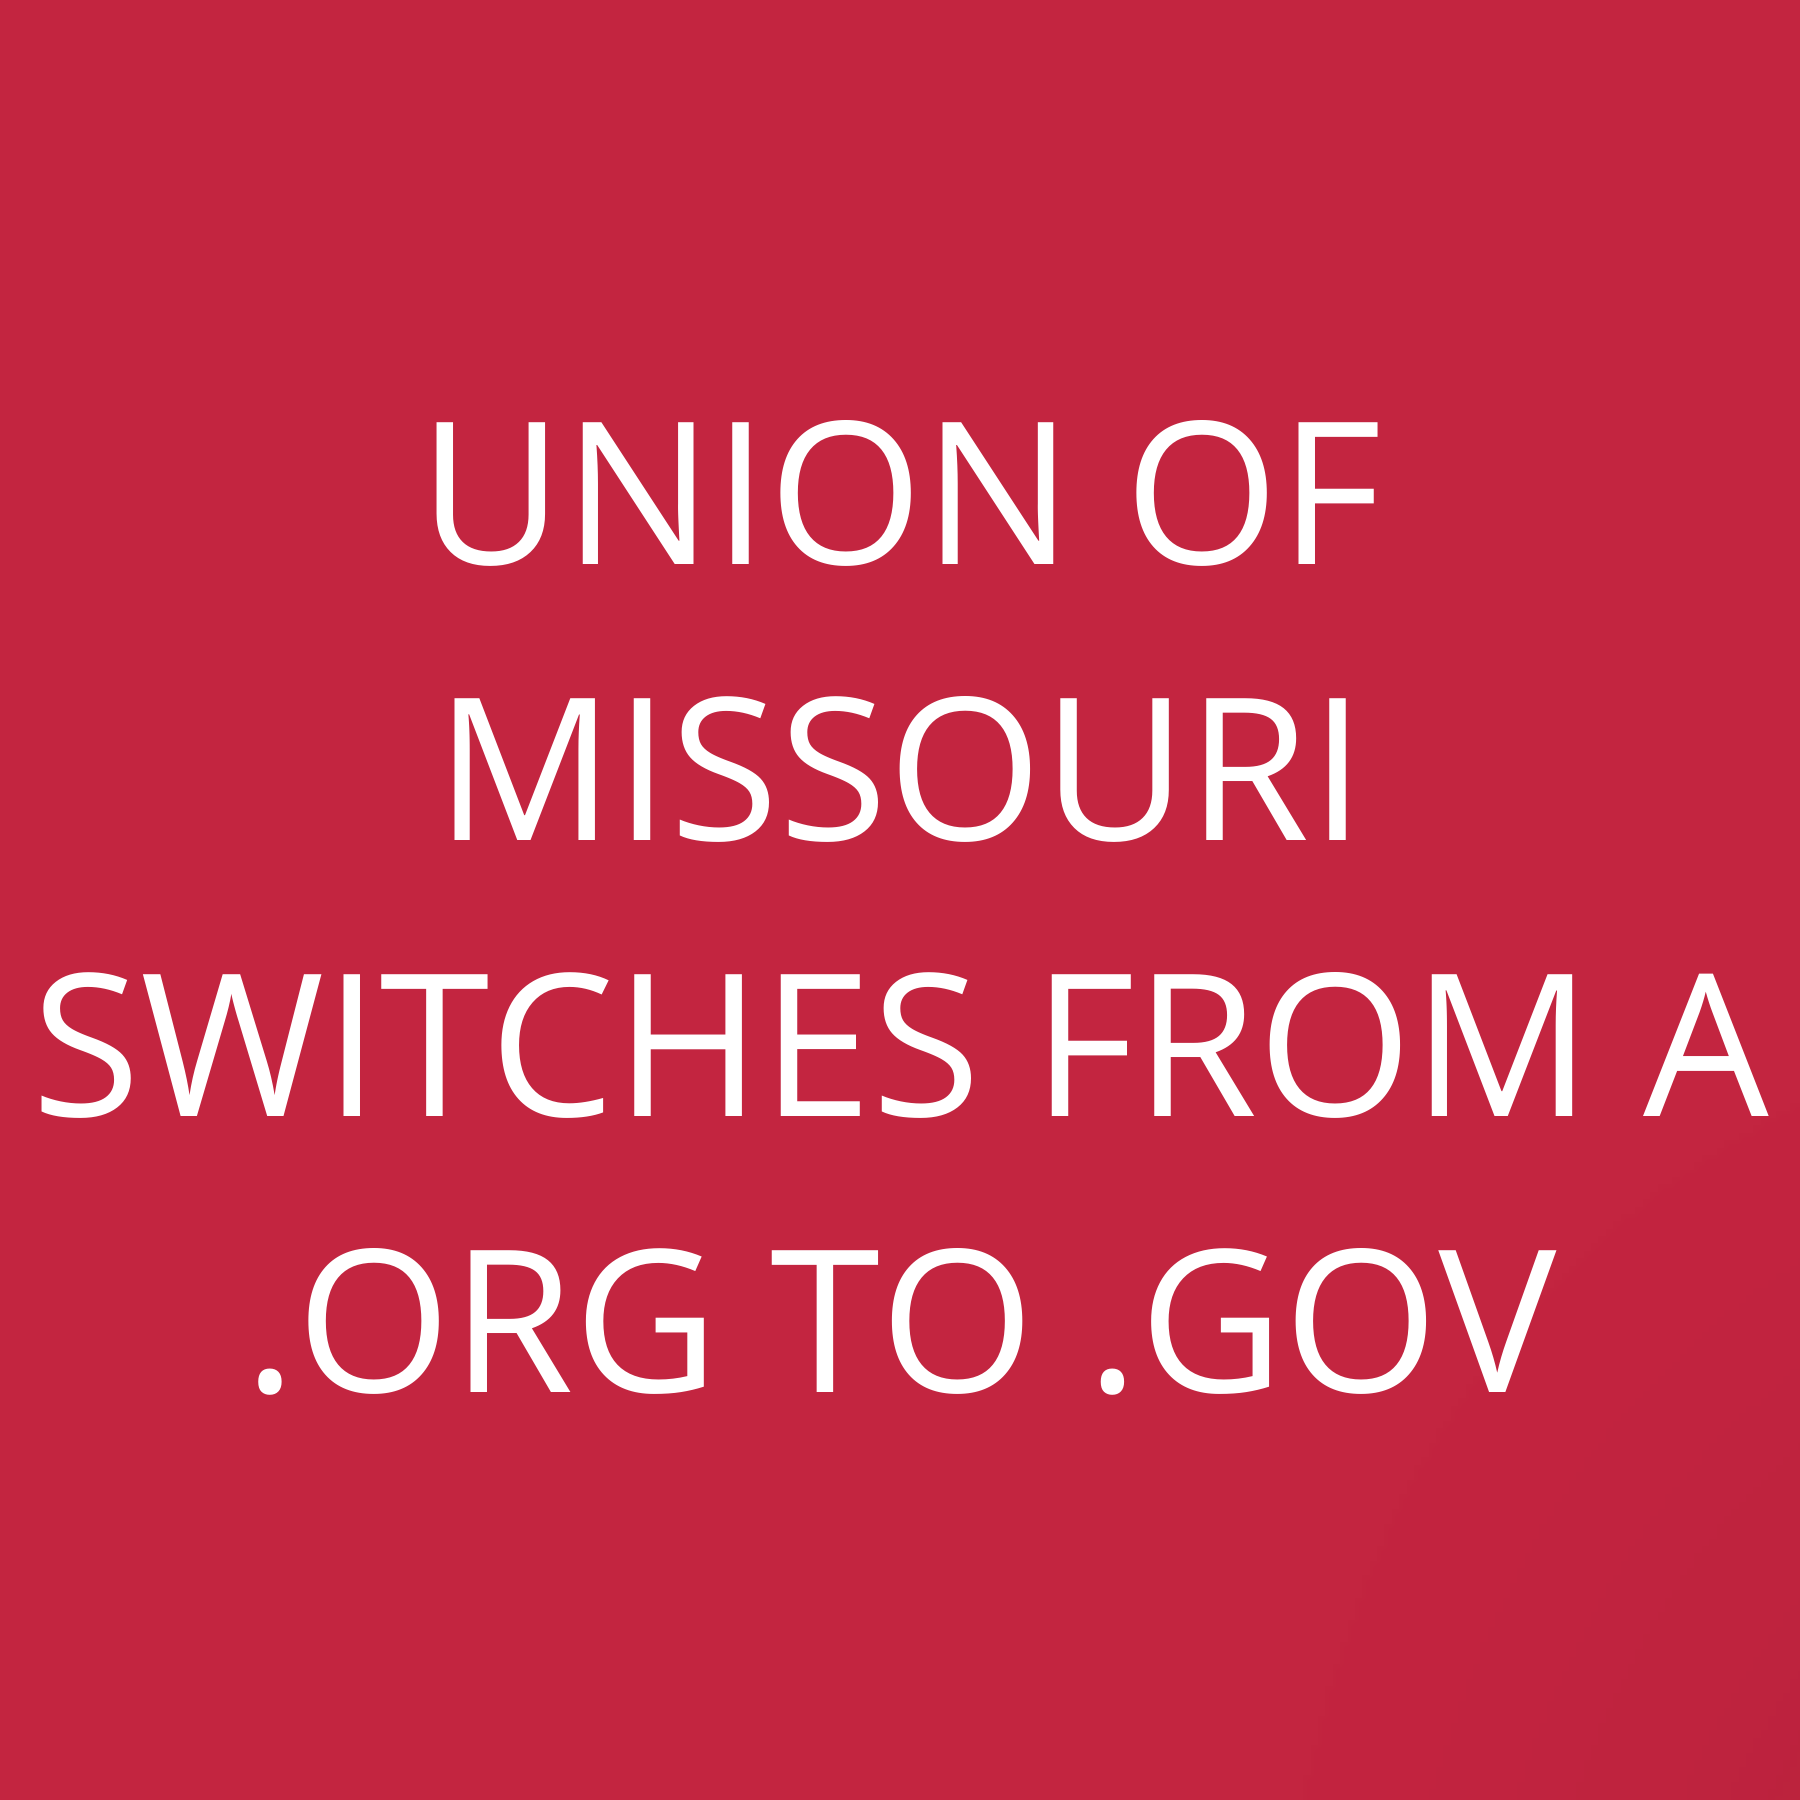 Union of Missouri switches from a .org to .gov